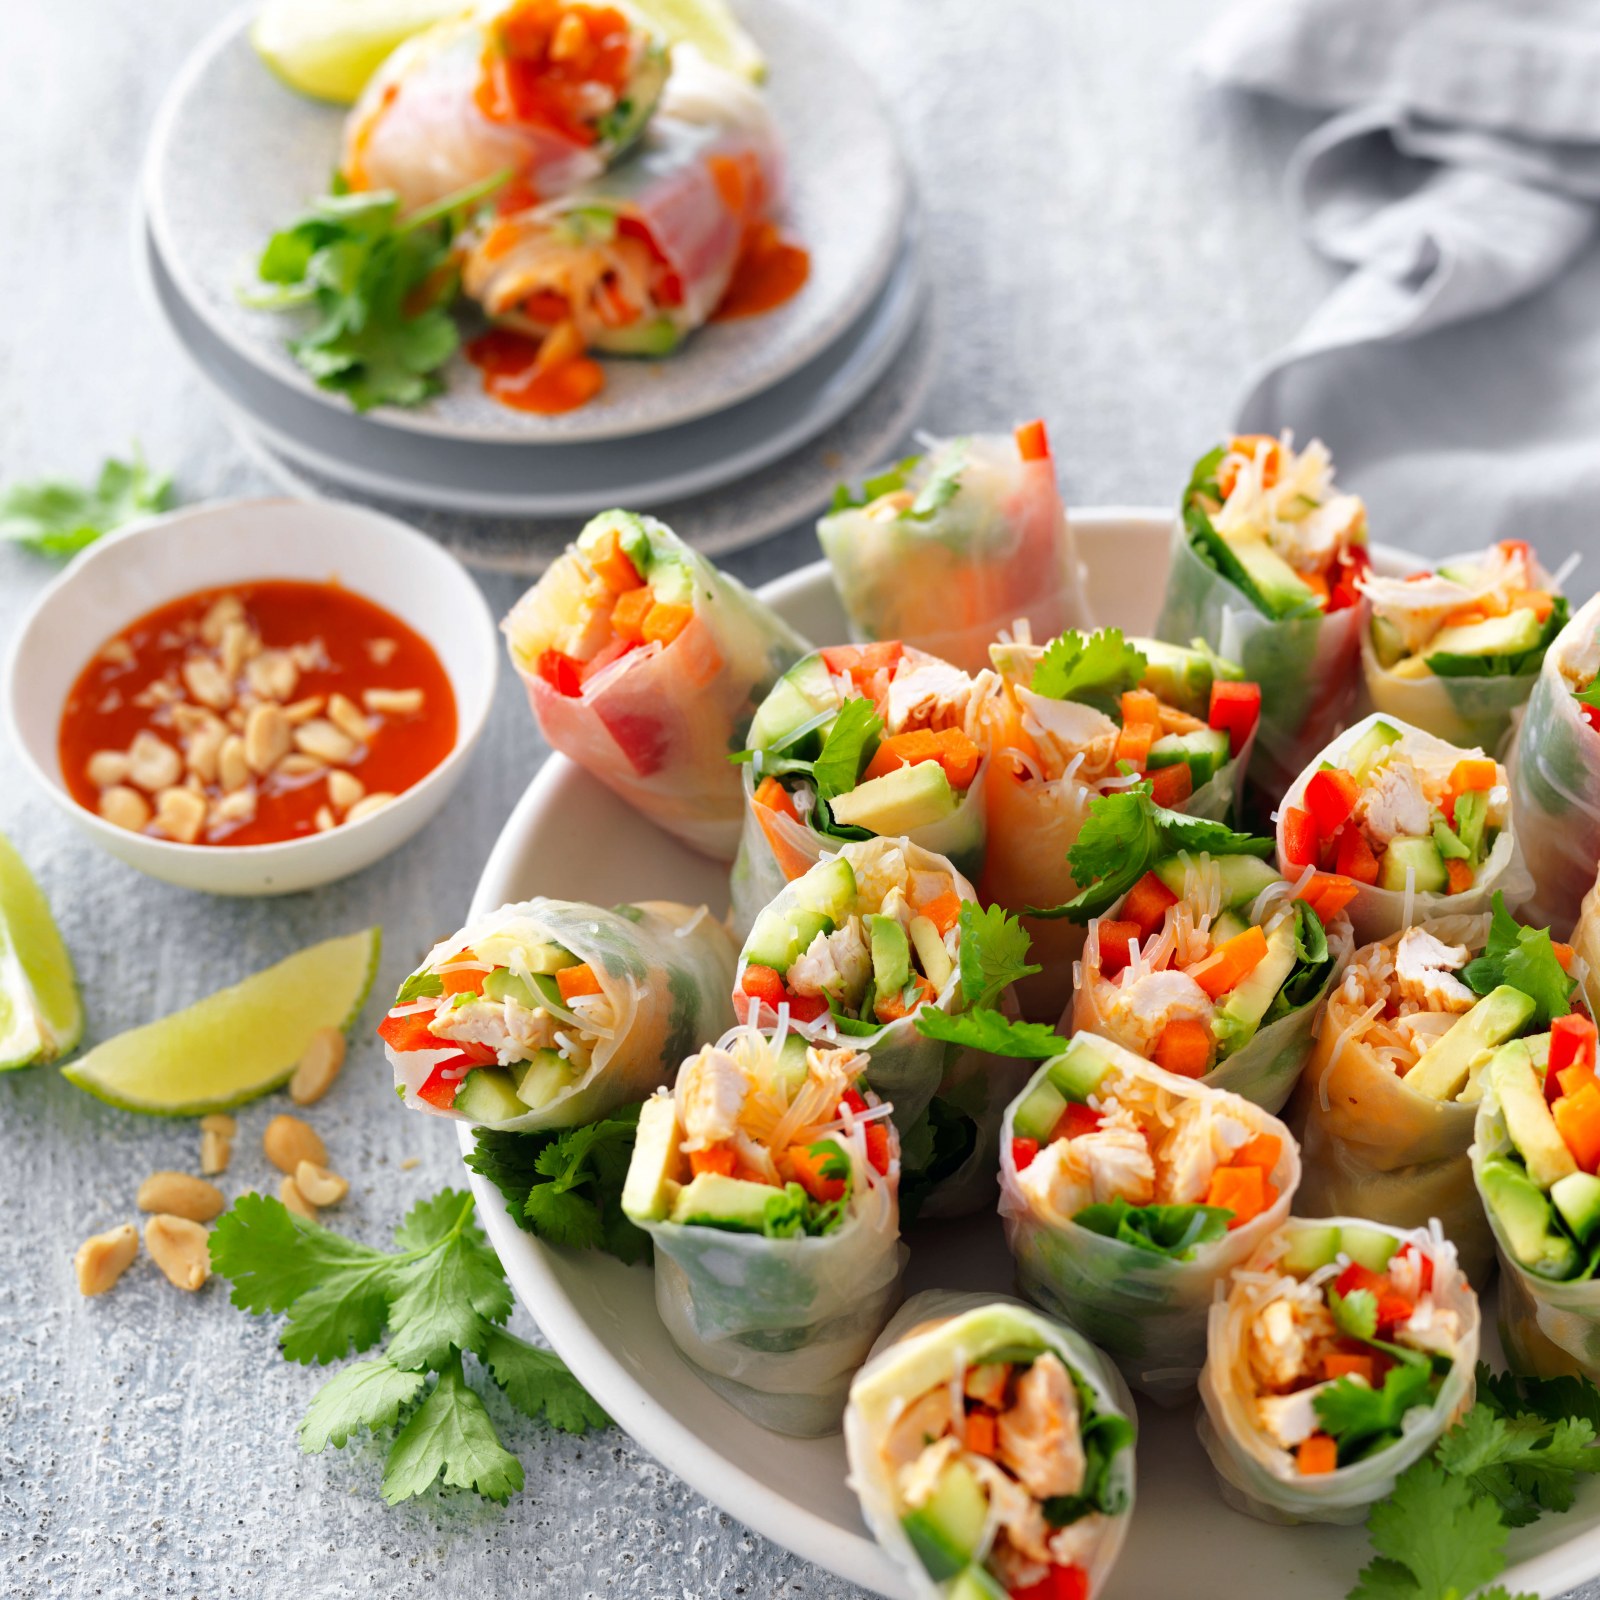 How to roll rice paper rolls  Cook Free Recipes from Australia's